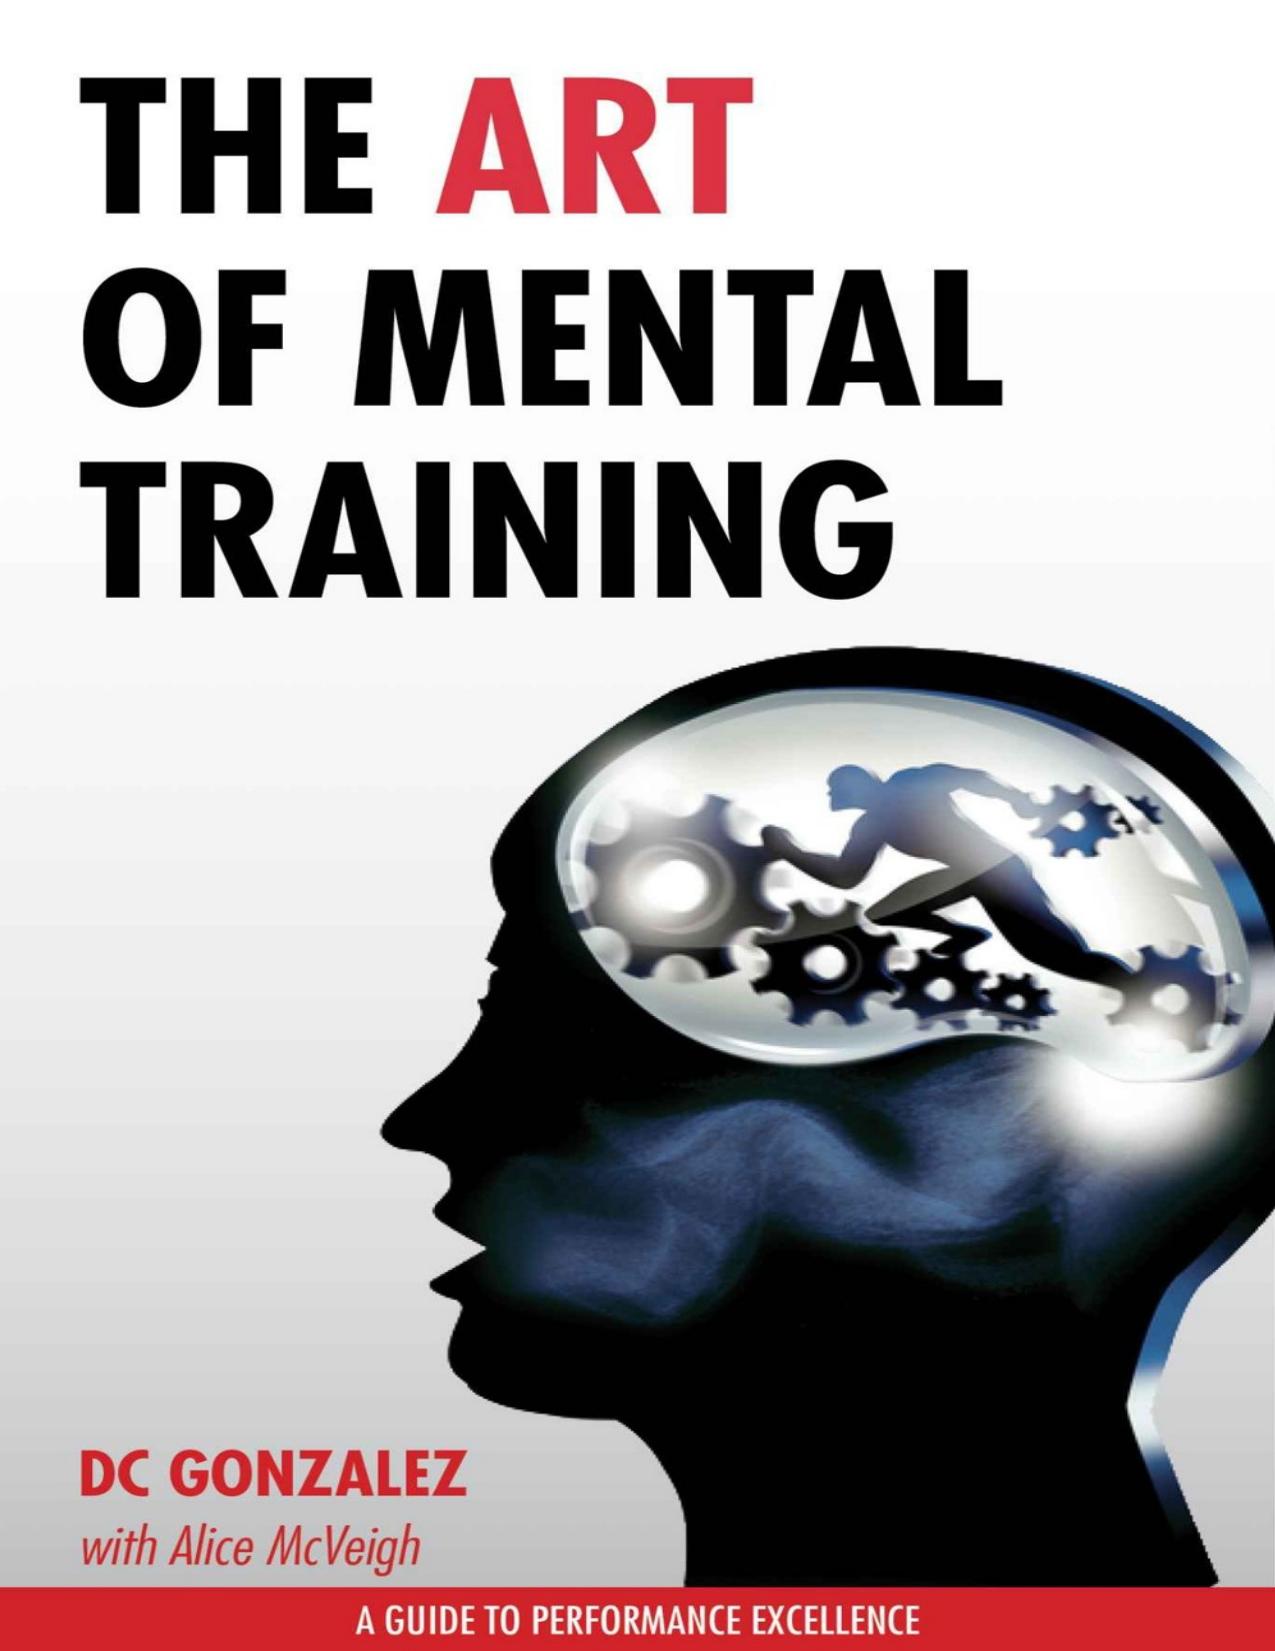 The Art of Mental Training: A Guide to Performance Excellence - PDFDrive.com